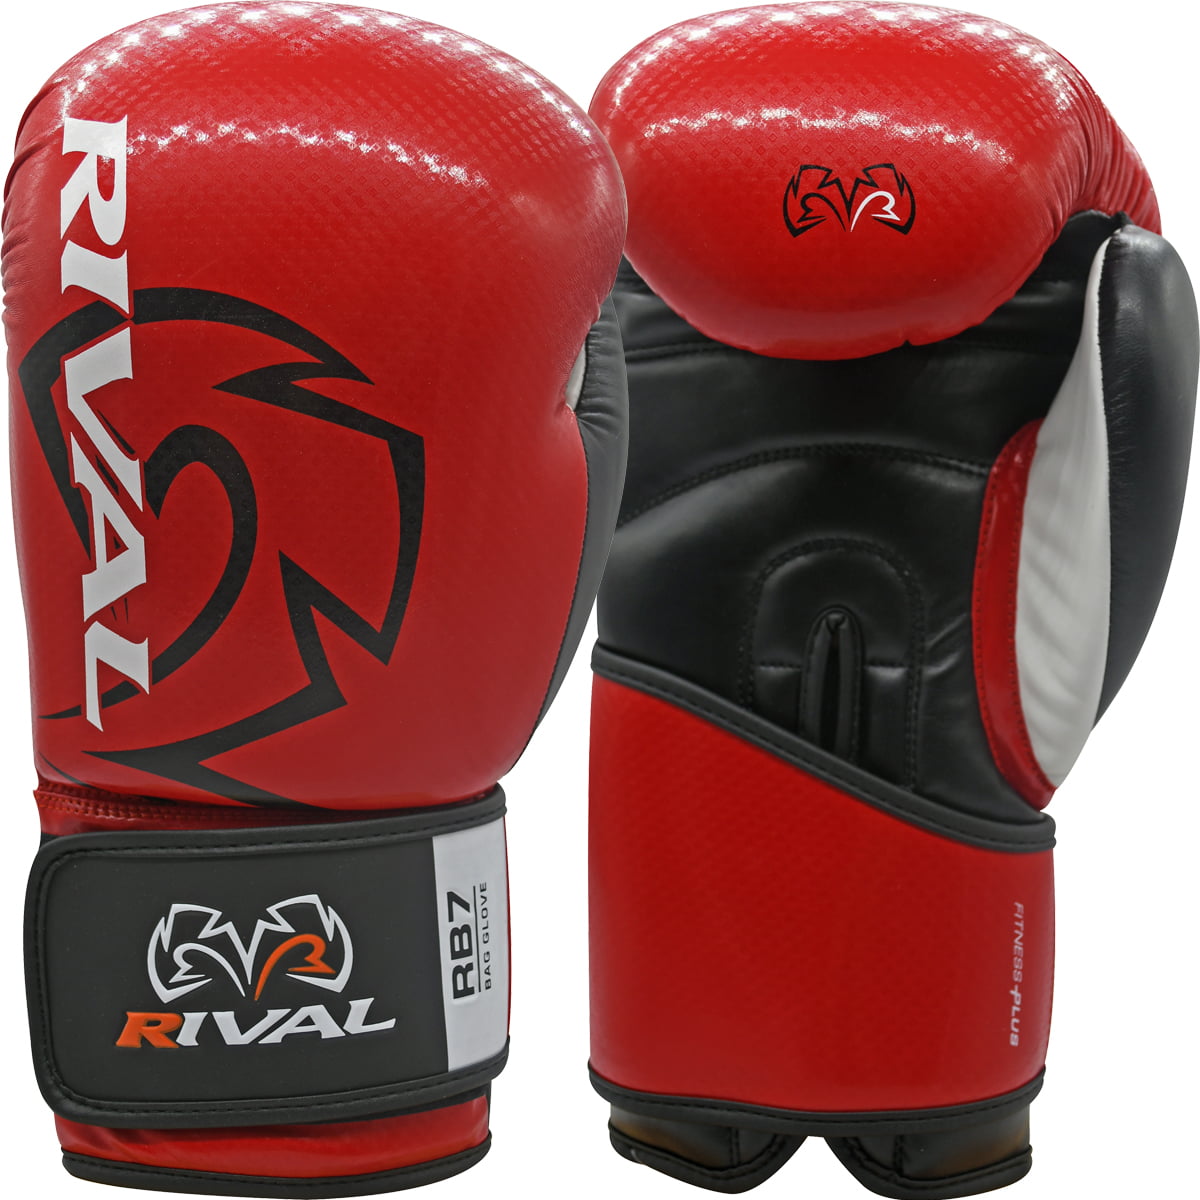 New Rival Leather Classic Sparring Boxing Gloves Red 14oz 